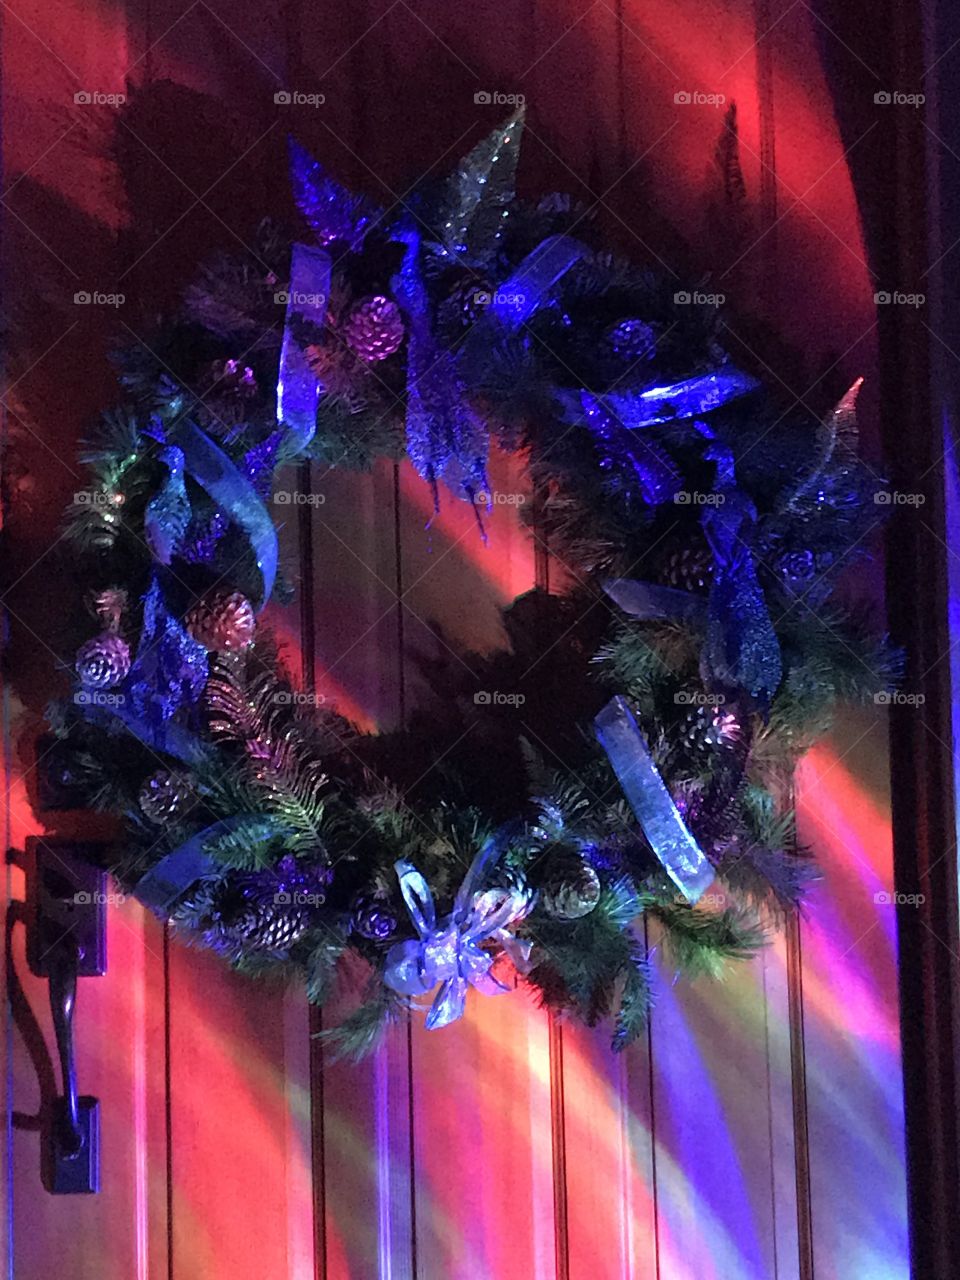 A nighttime shot of the Christmas wreath on my front door with the pink, blue and purple tones of my led projector light shining on the wood door.